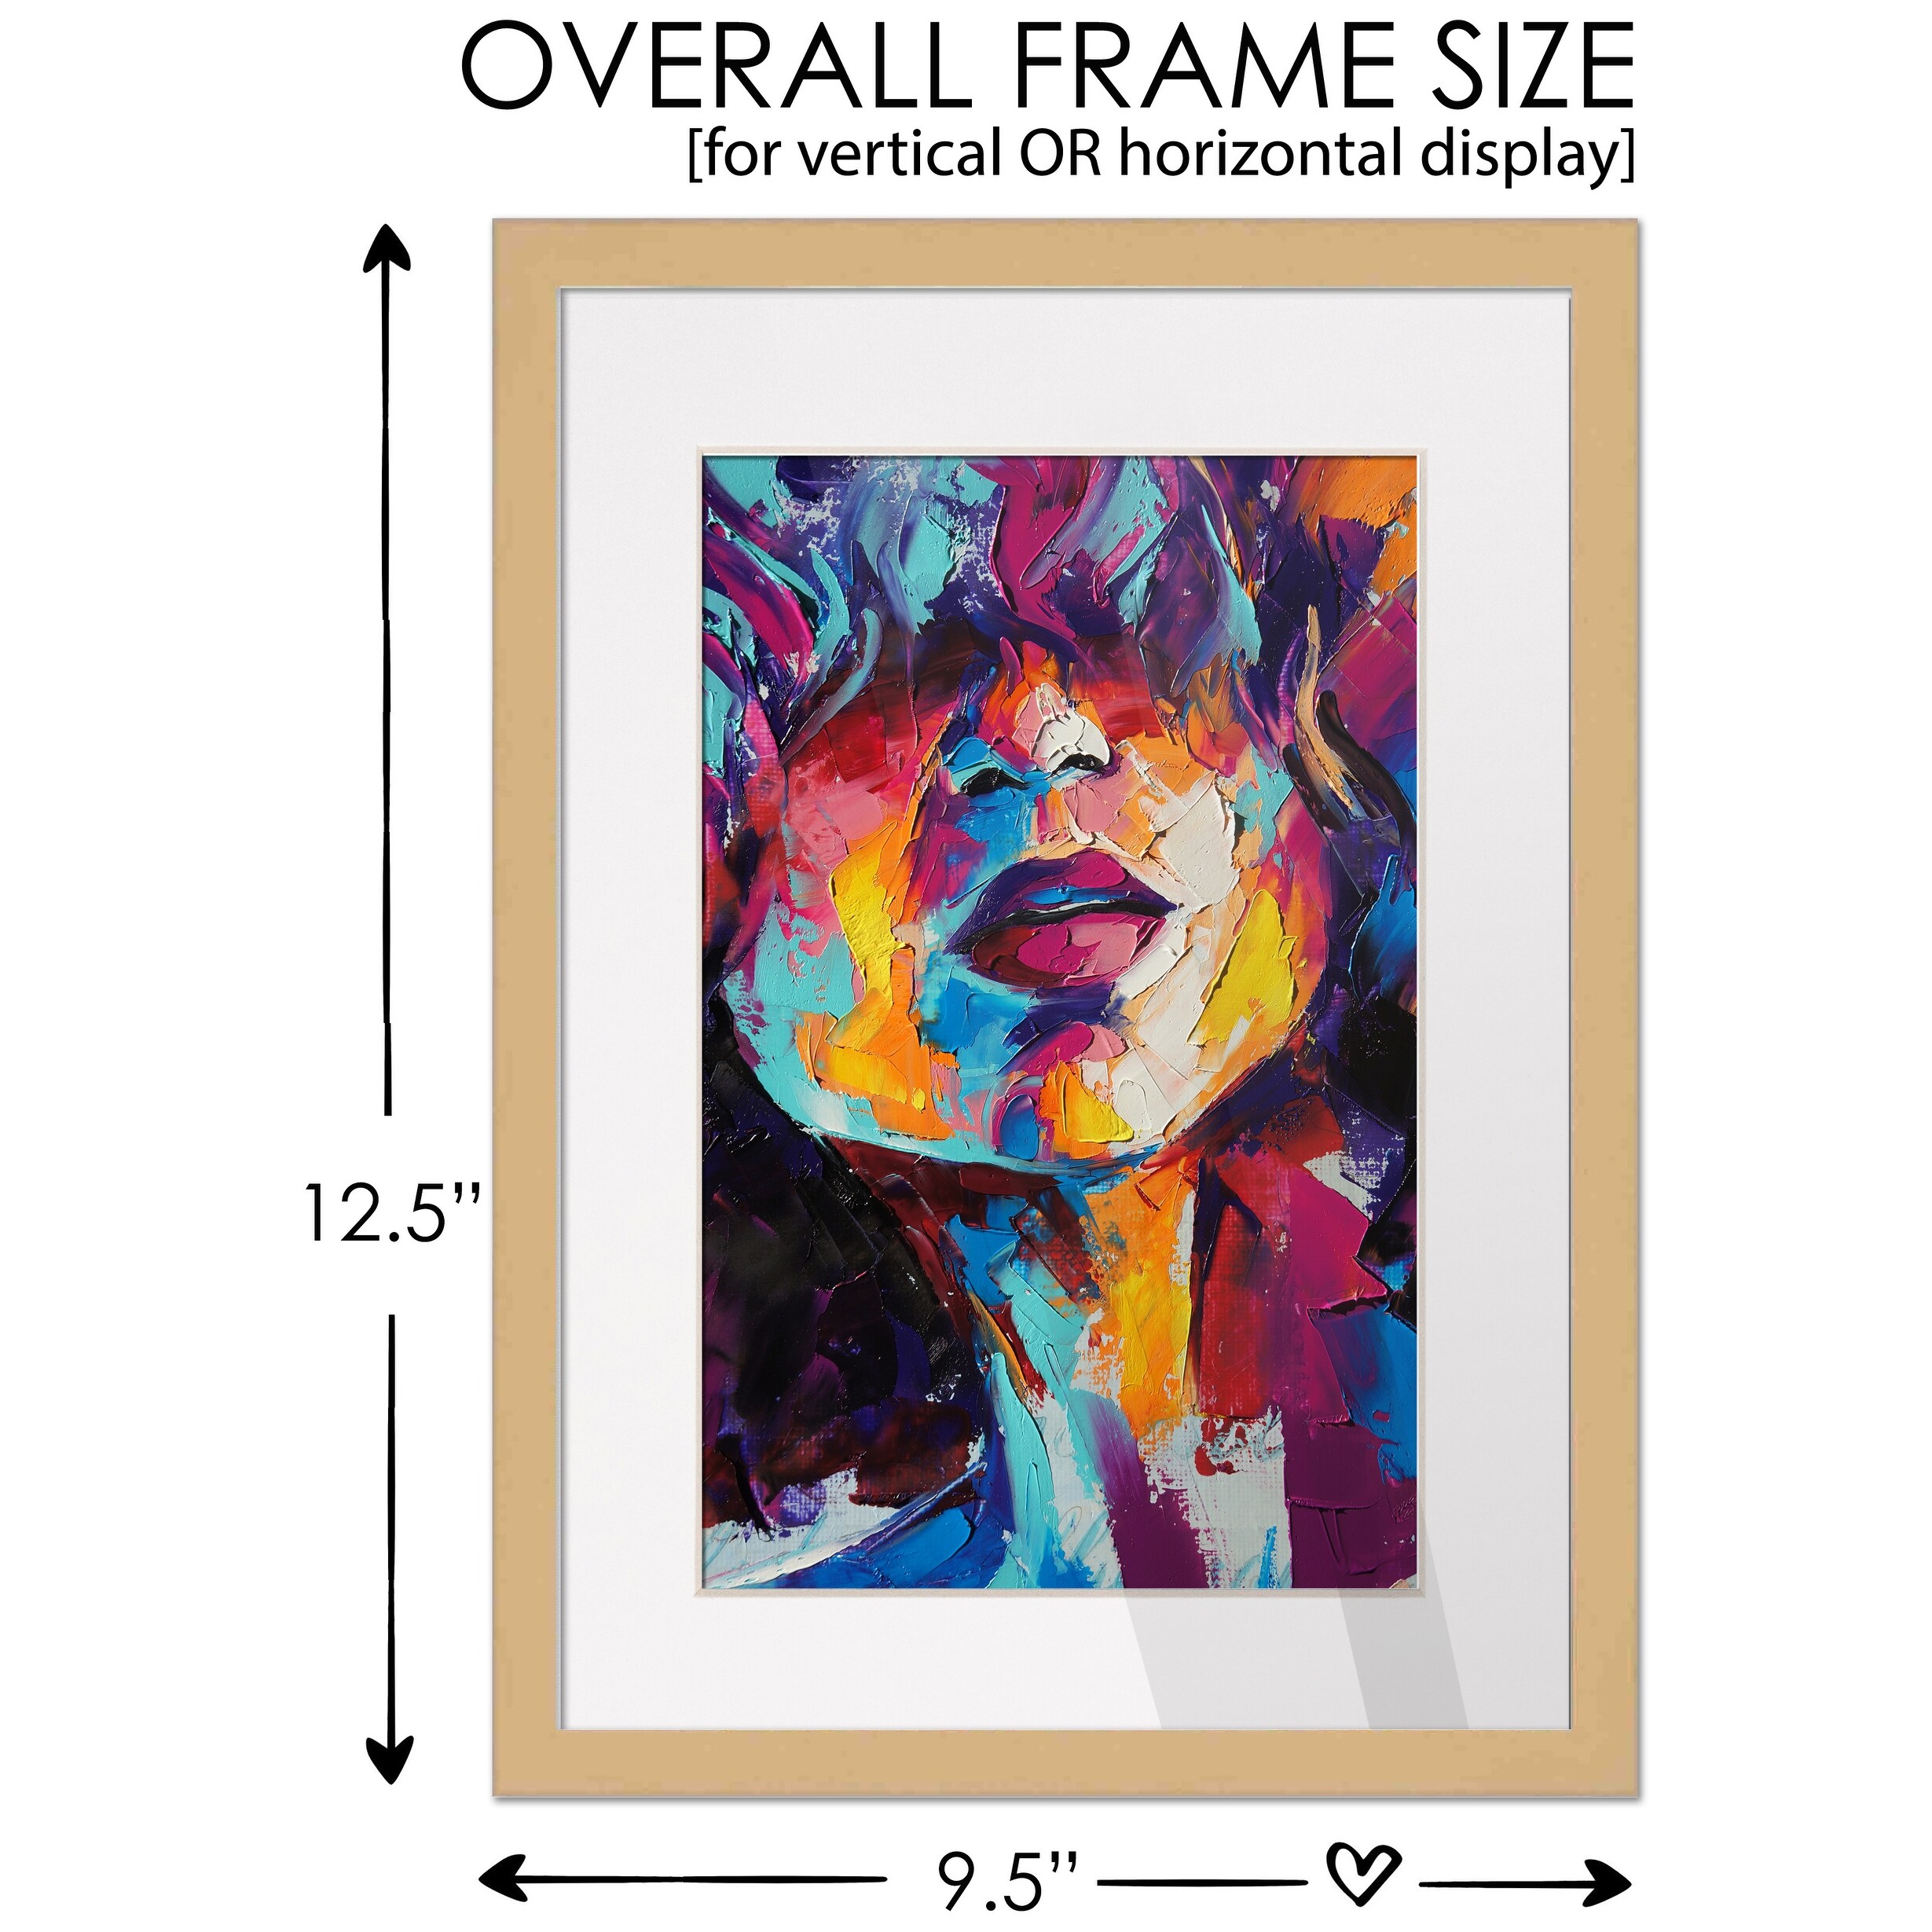 CustomPictureFrames.com 20x20 Frame Natural Brown Picture Frame - Modern Photo Frame Includes UV Acrylic Shatter Guard Front, Acid Free Foam Backing